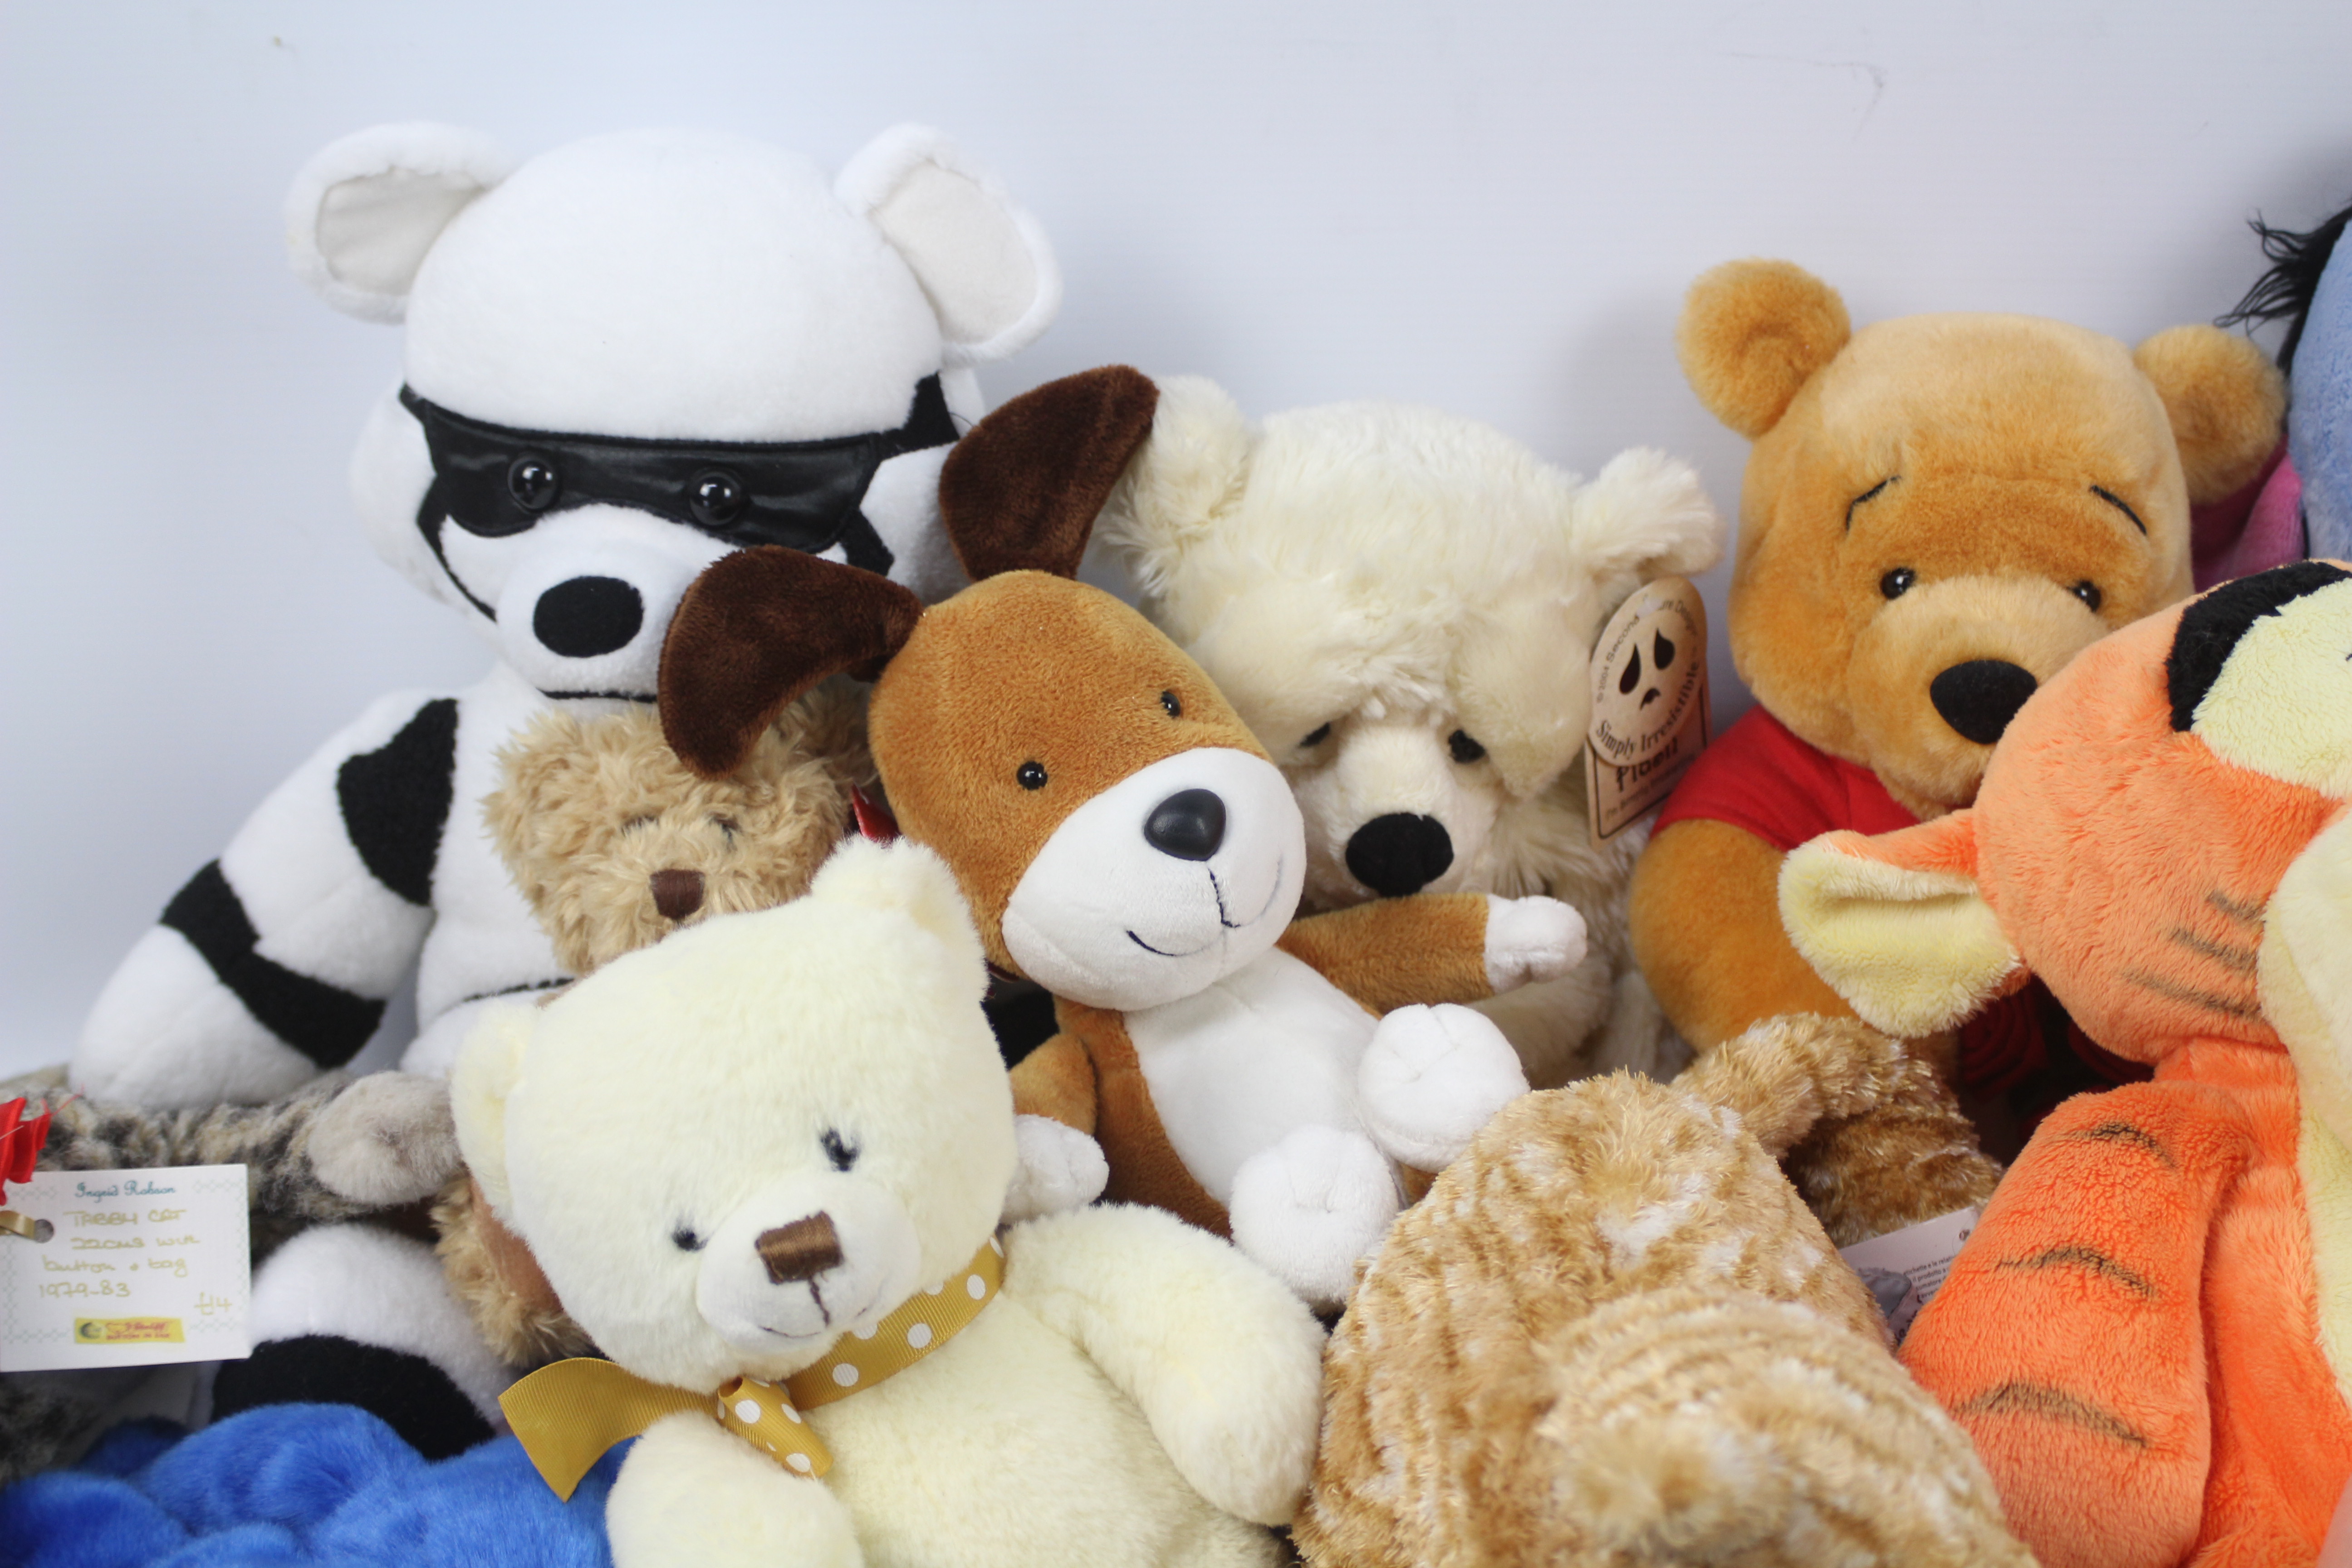 Keel Toys - Gund - Steiff - Bears and soft toys. - Image 2 of 4